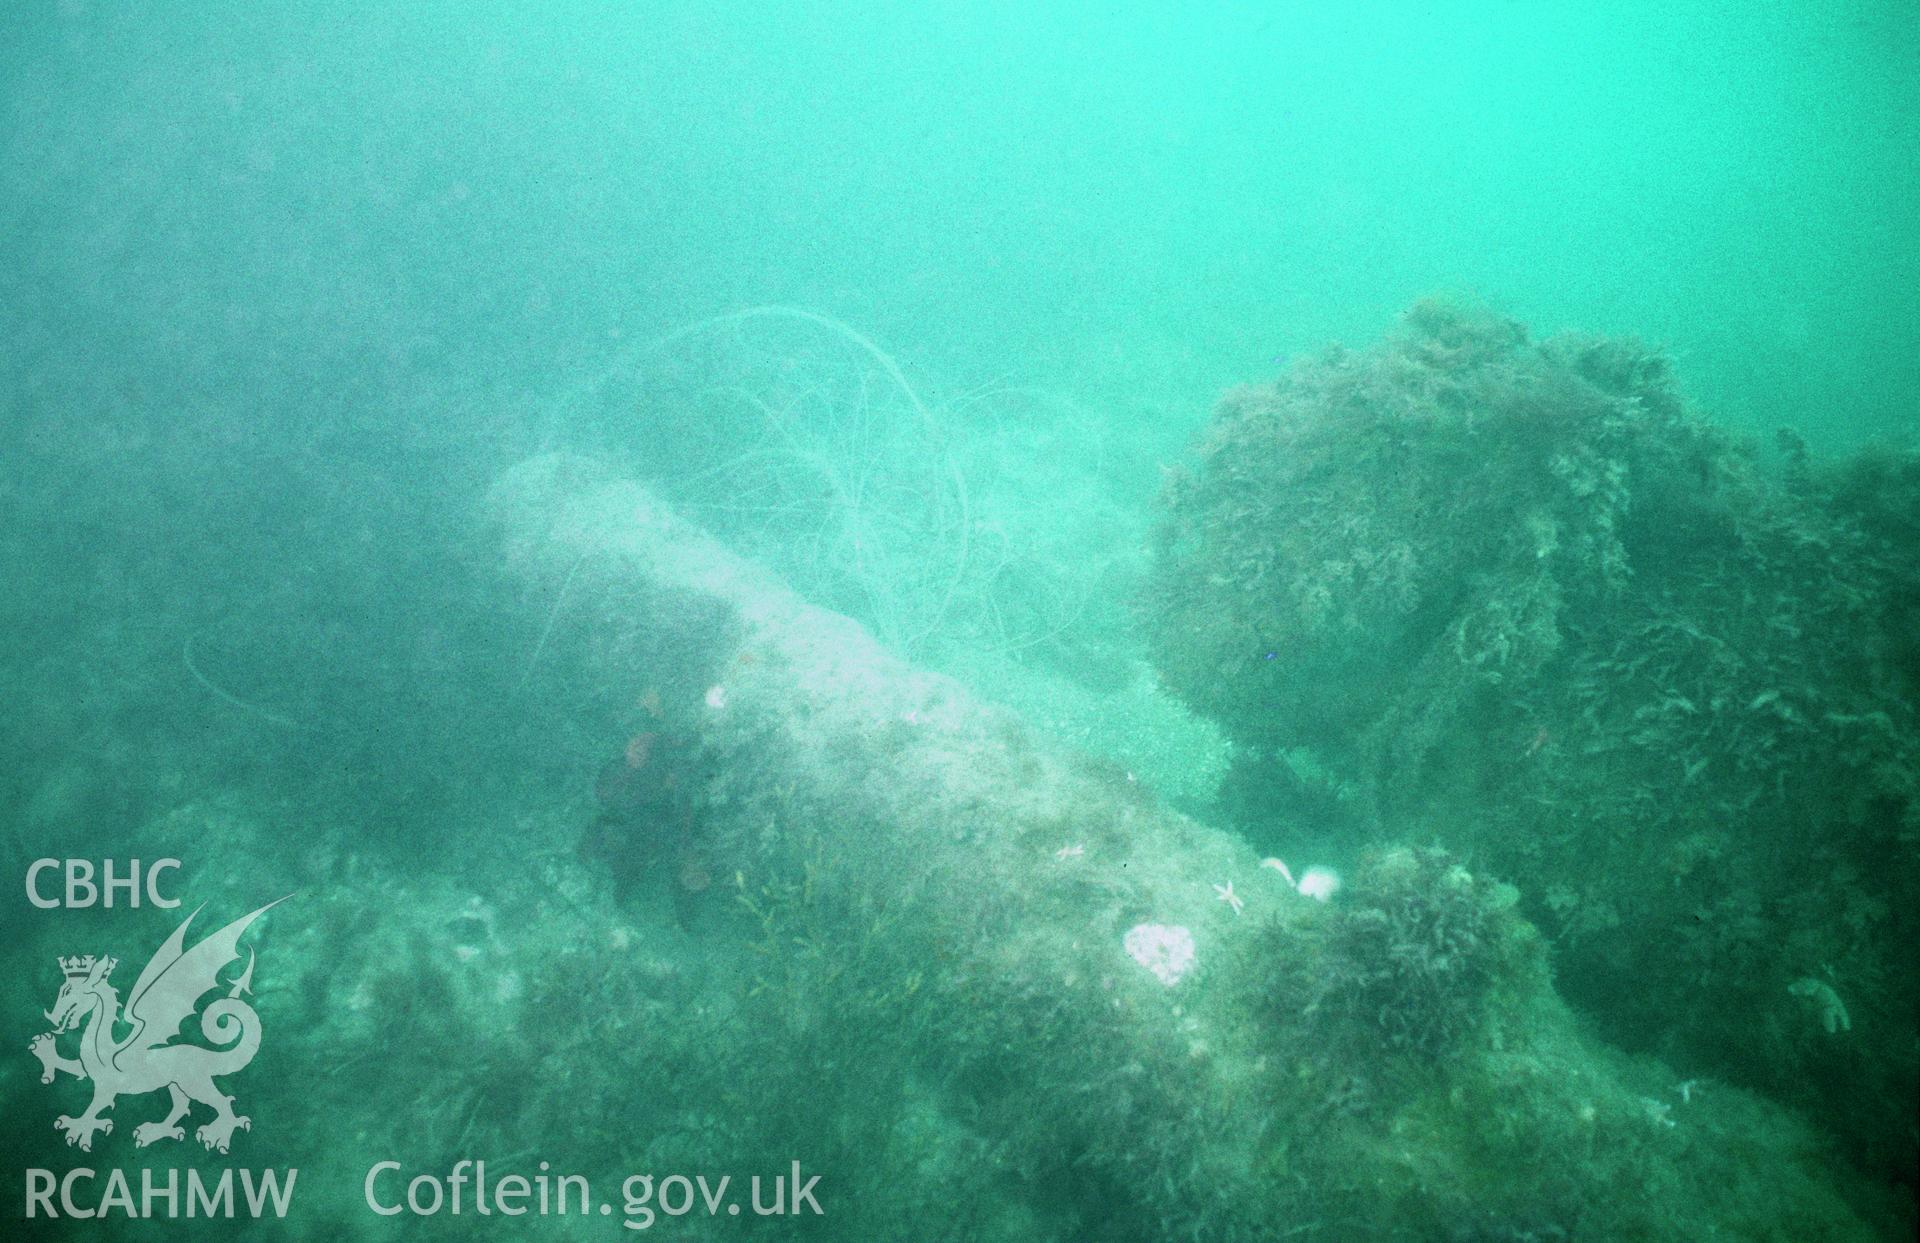 View showing one of the ship's iron cannon in situ, one of a set of 41 colour slides from an underwater survey of the Tal-y-Bont designated shipwreck, carried out by the Archaeological Diving Unit.